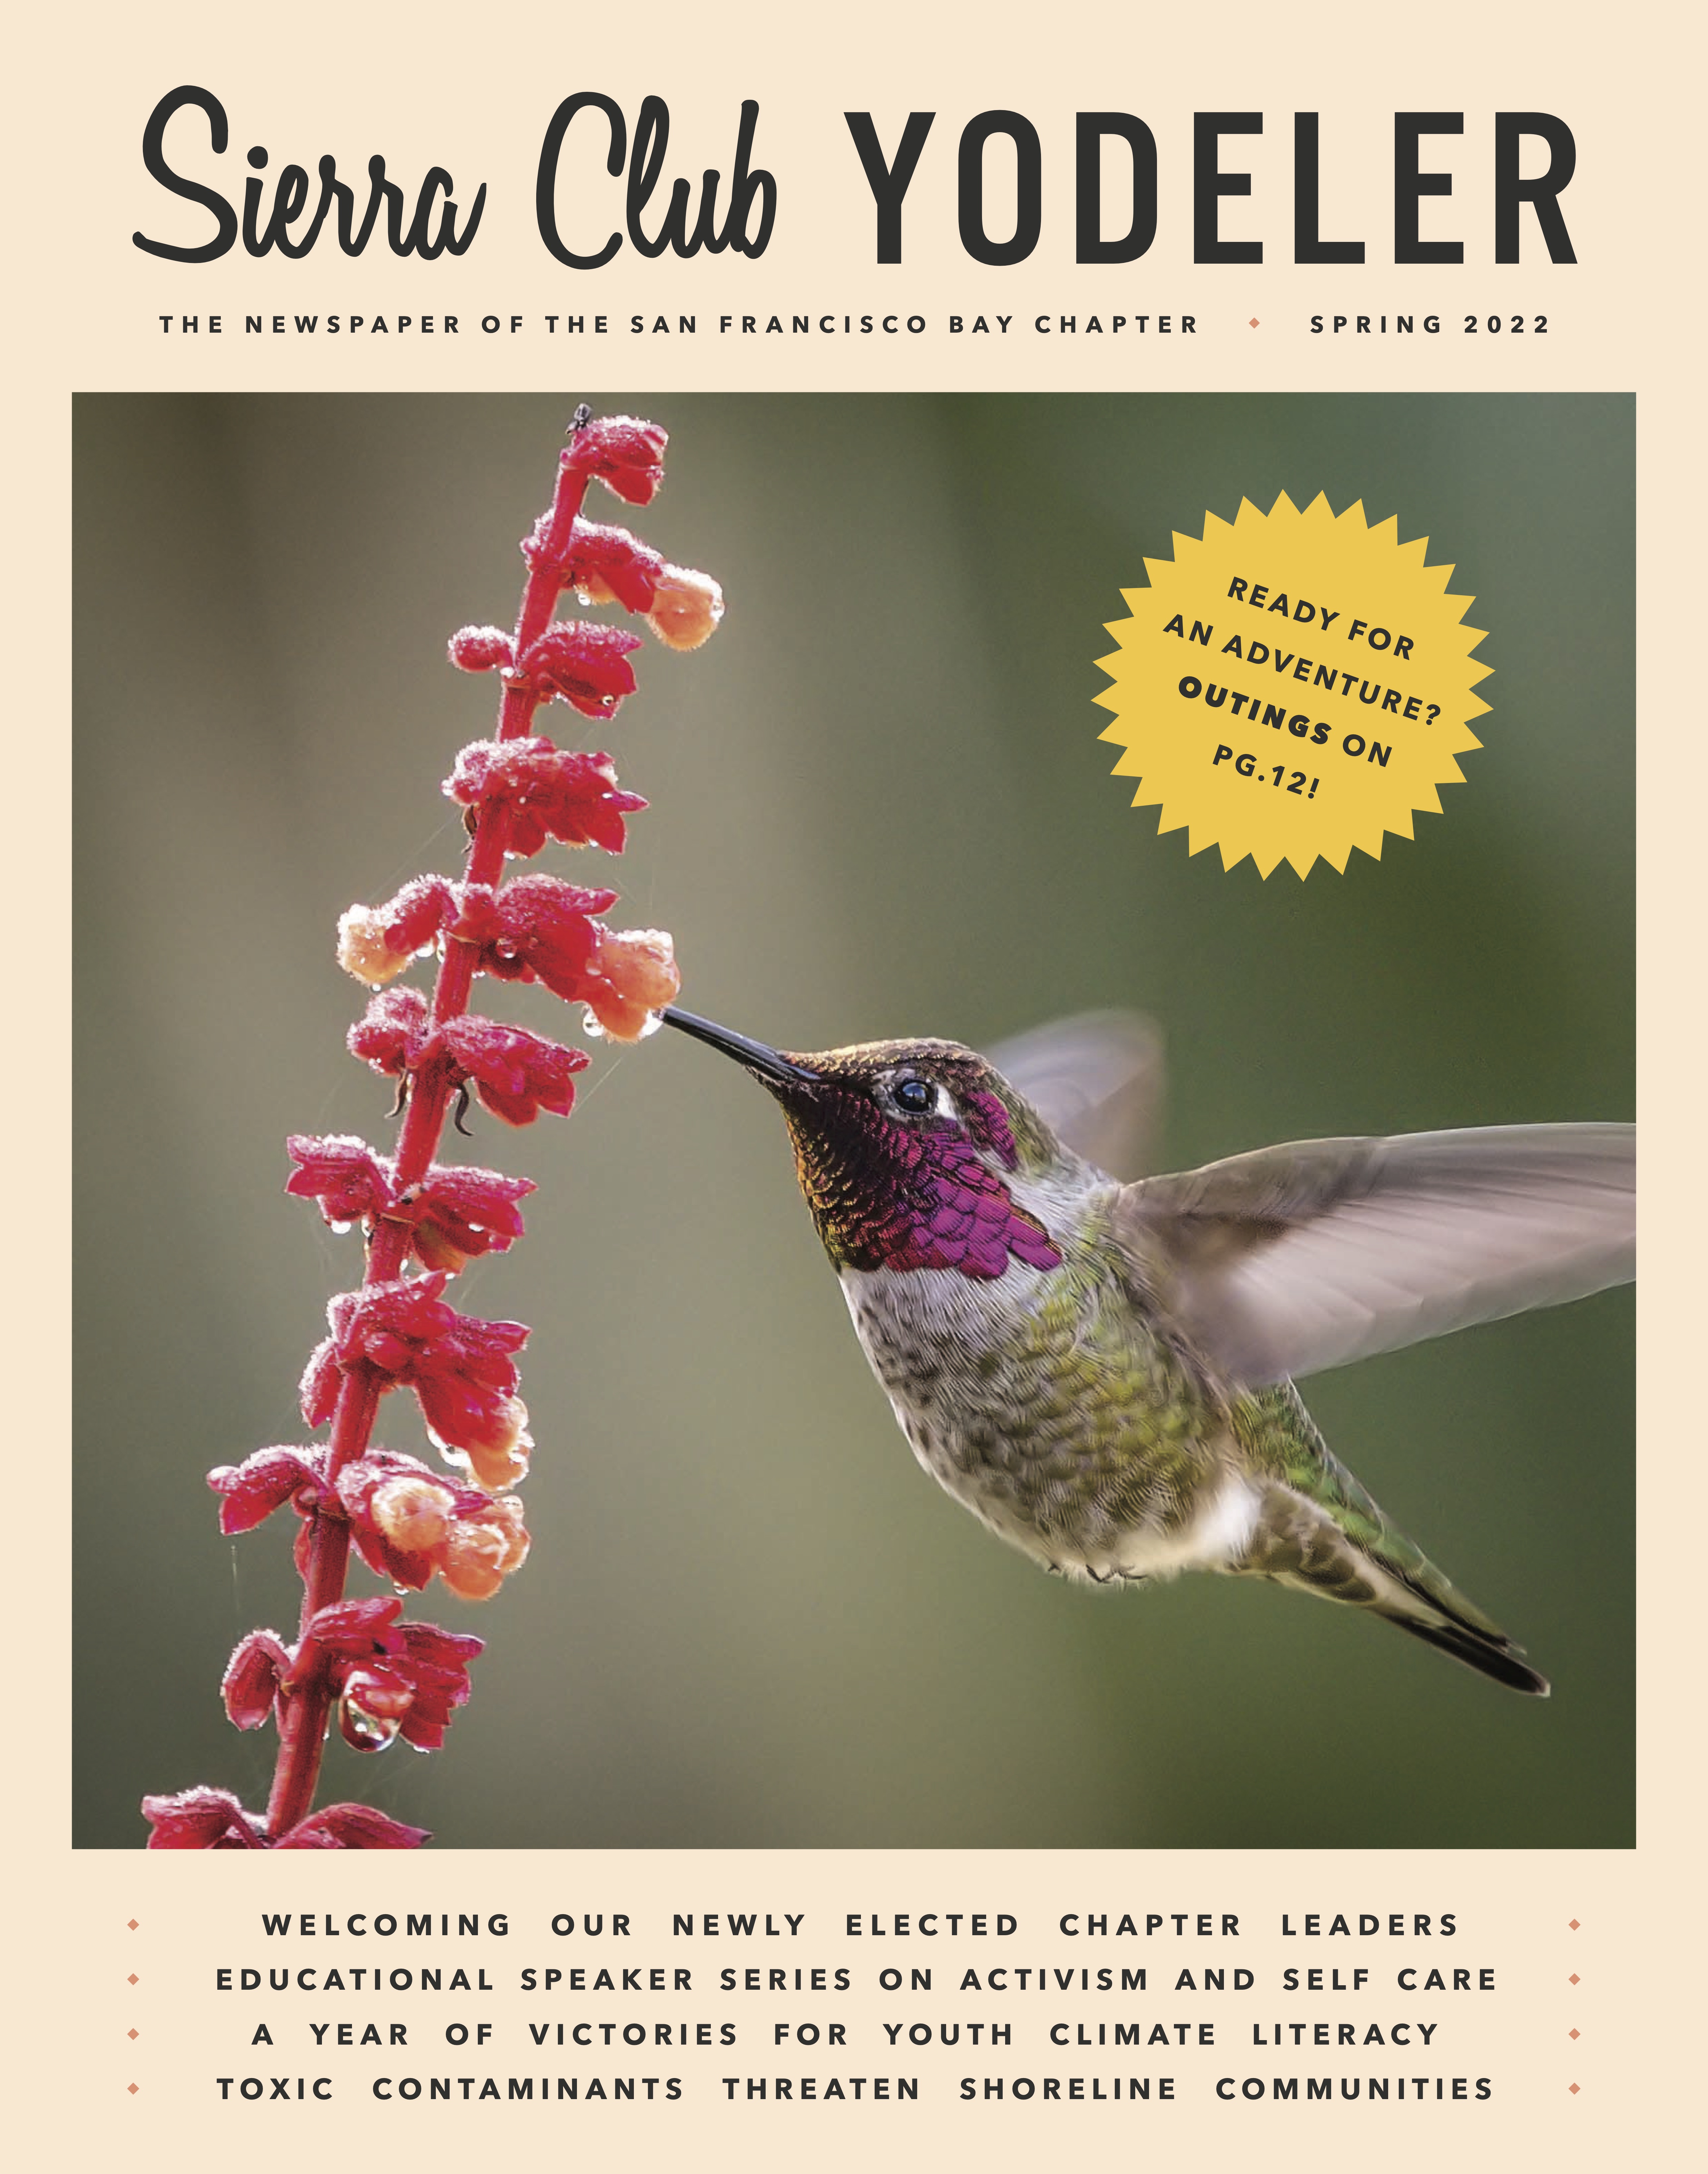 Spring 2022 Yodeler cover with hummingbird